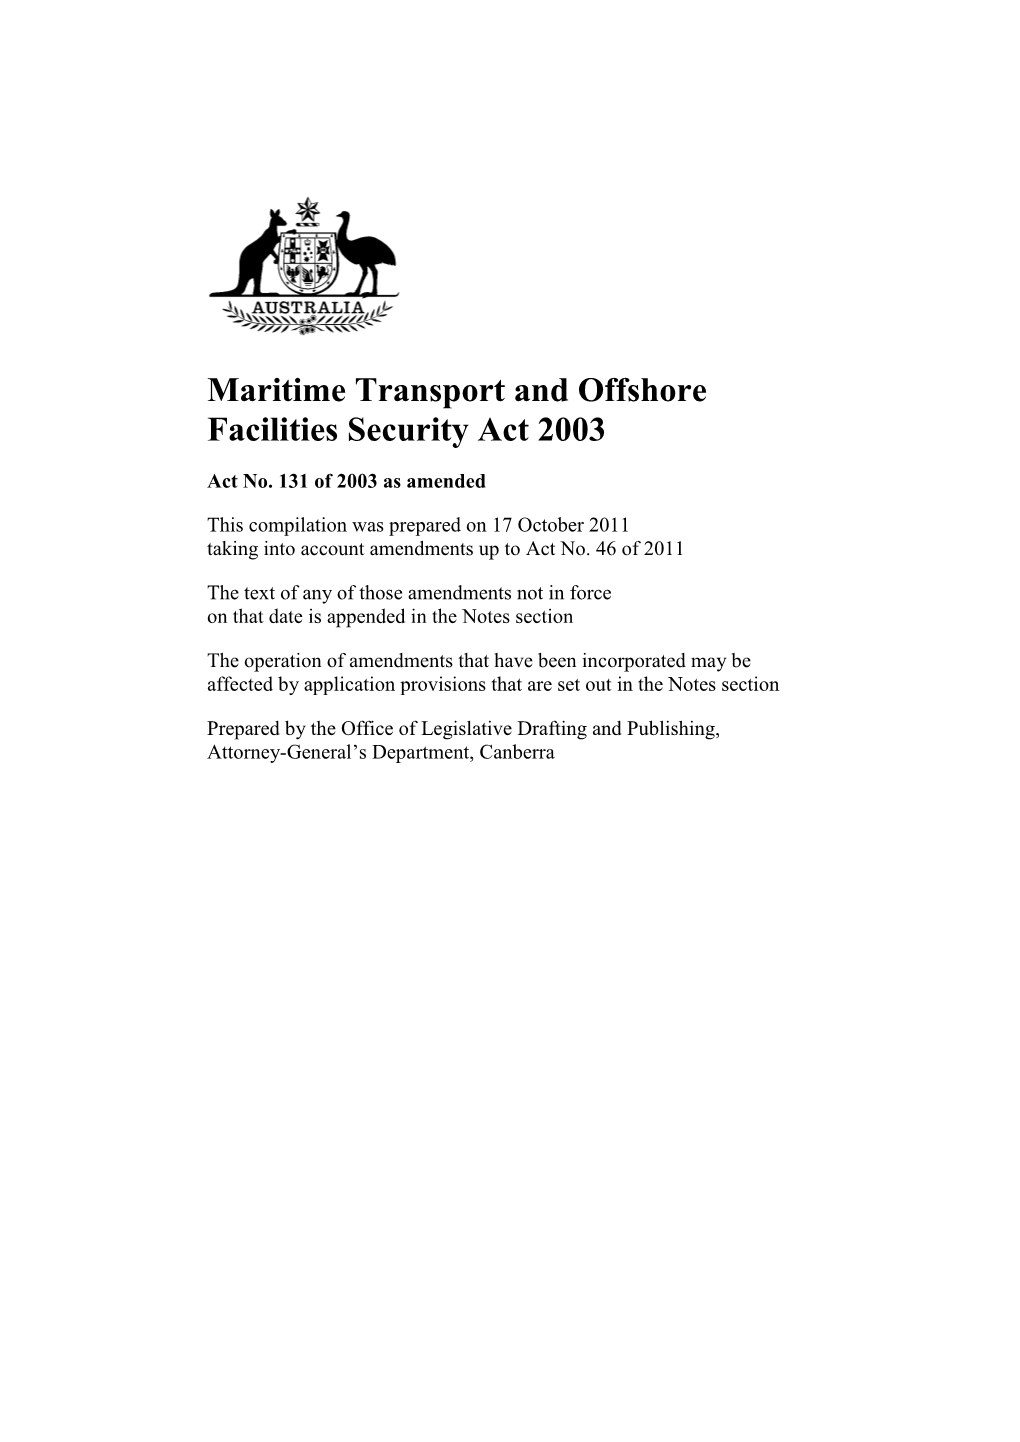 Maritime Transport and Offshore Facilities Security Act 2003